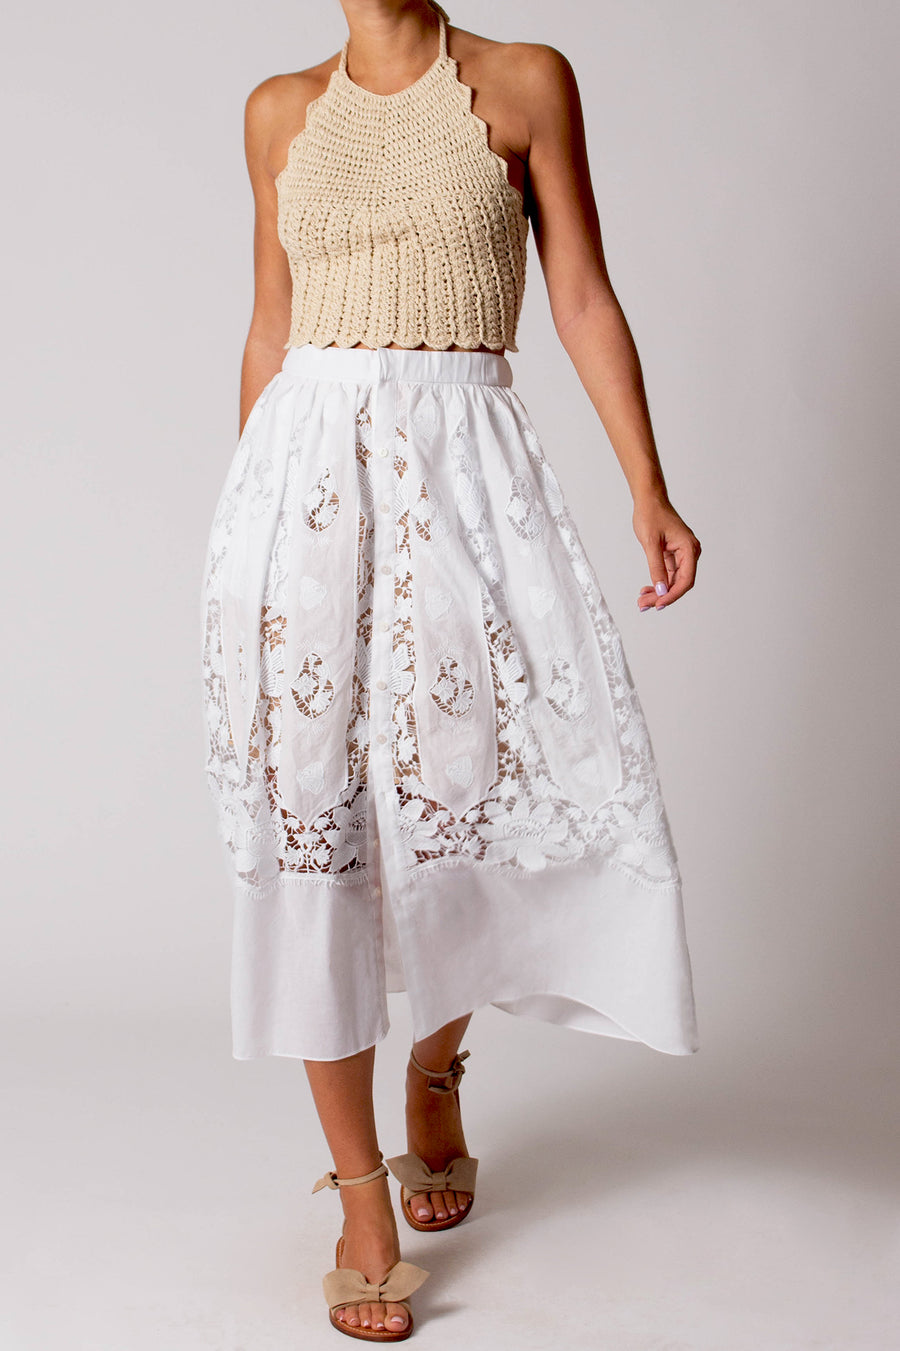 This photo shows a woman wearing a long white skirt with buttons and lace detailing.